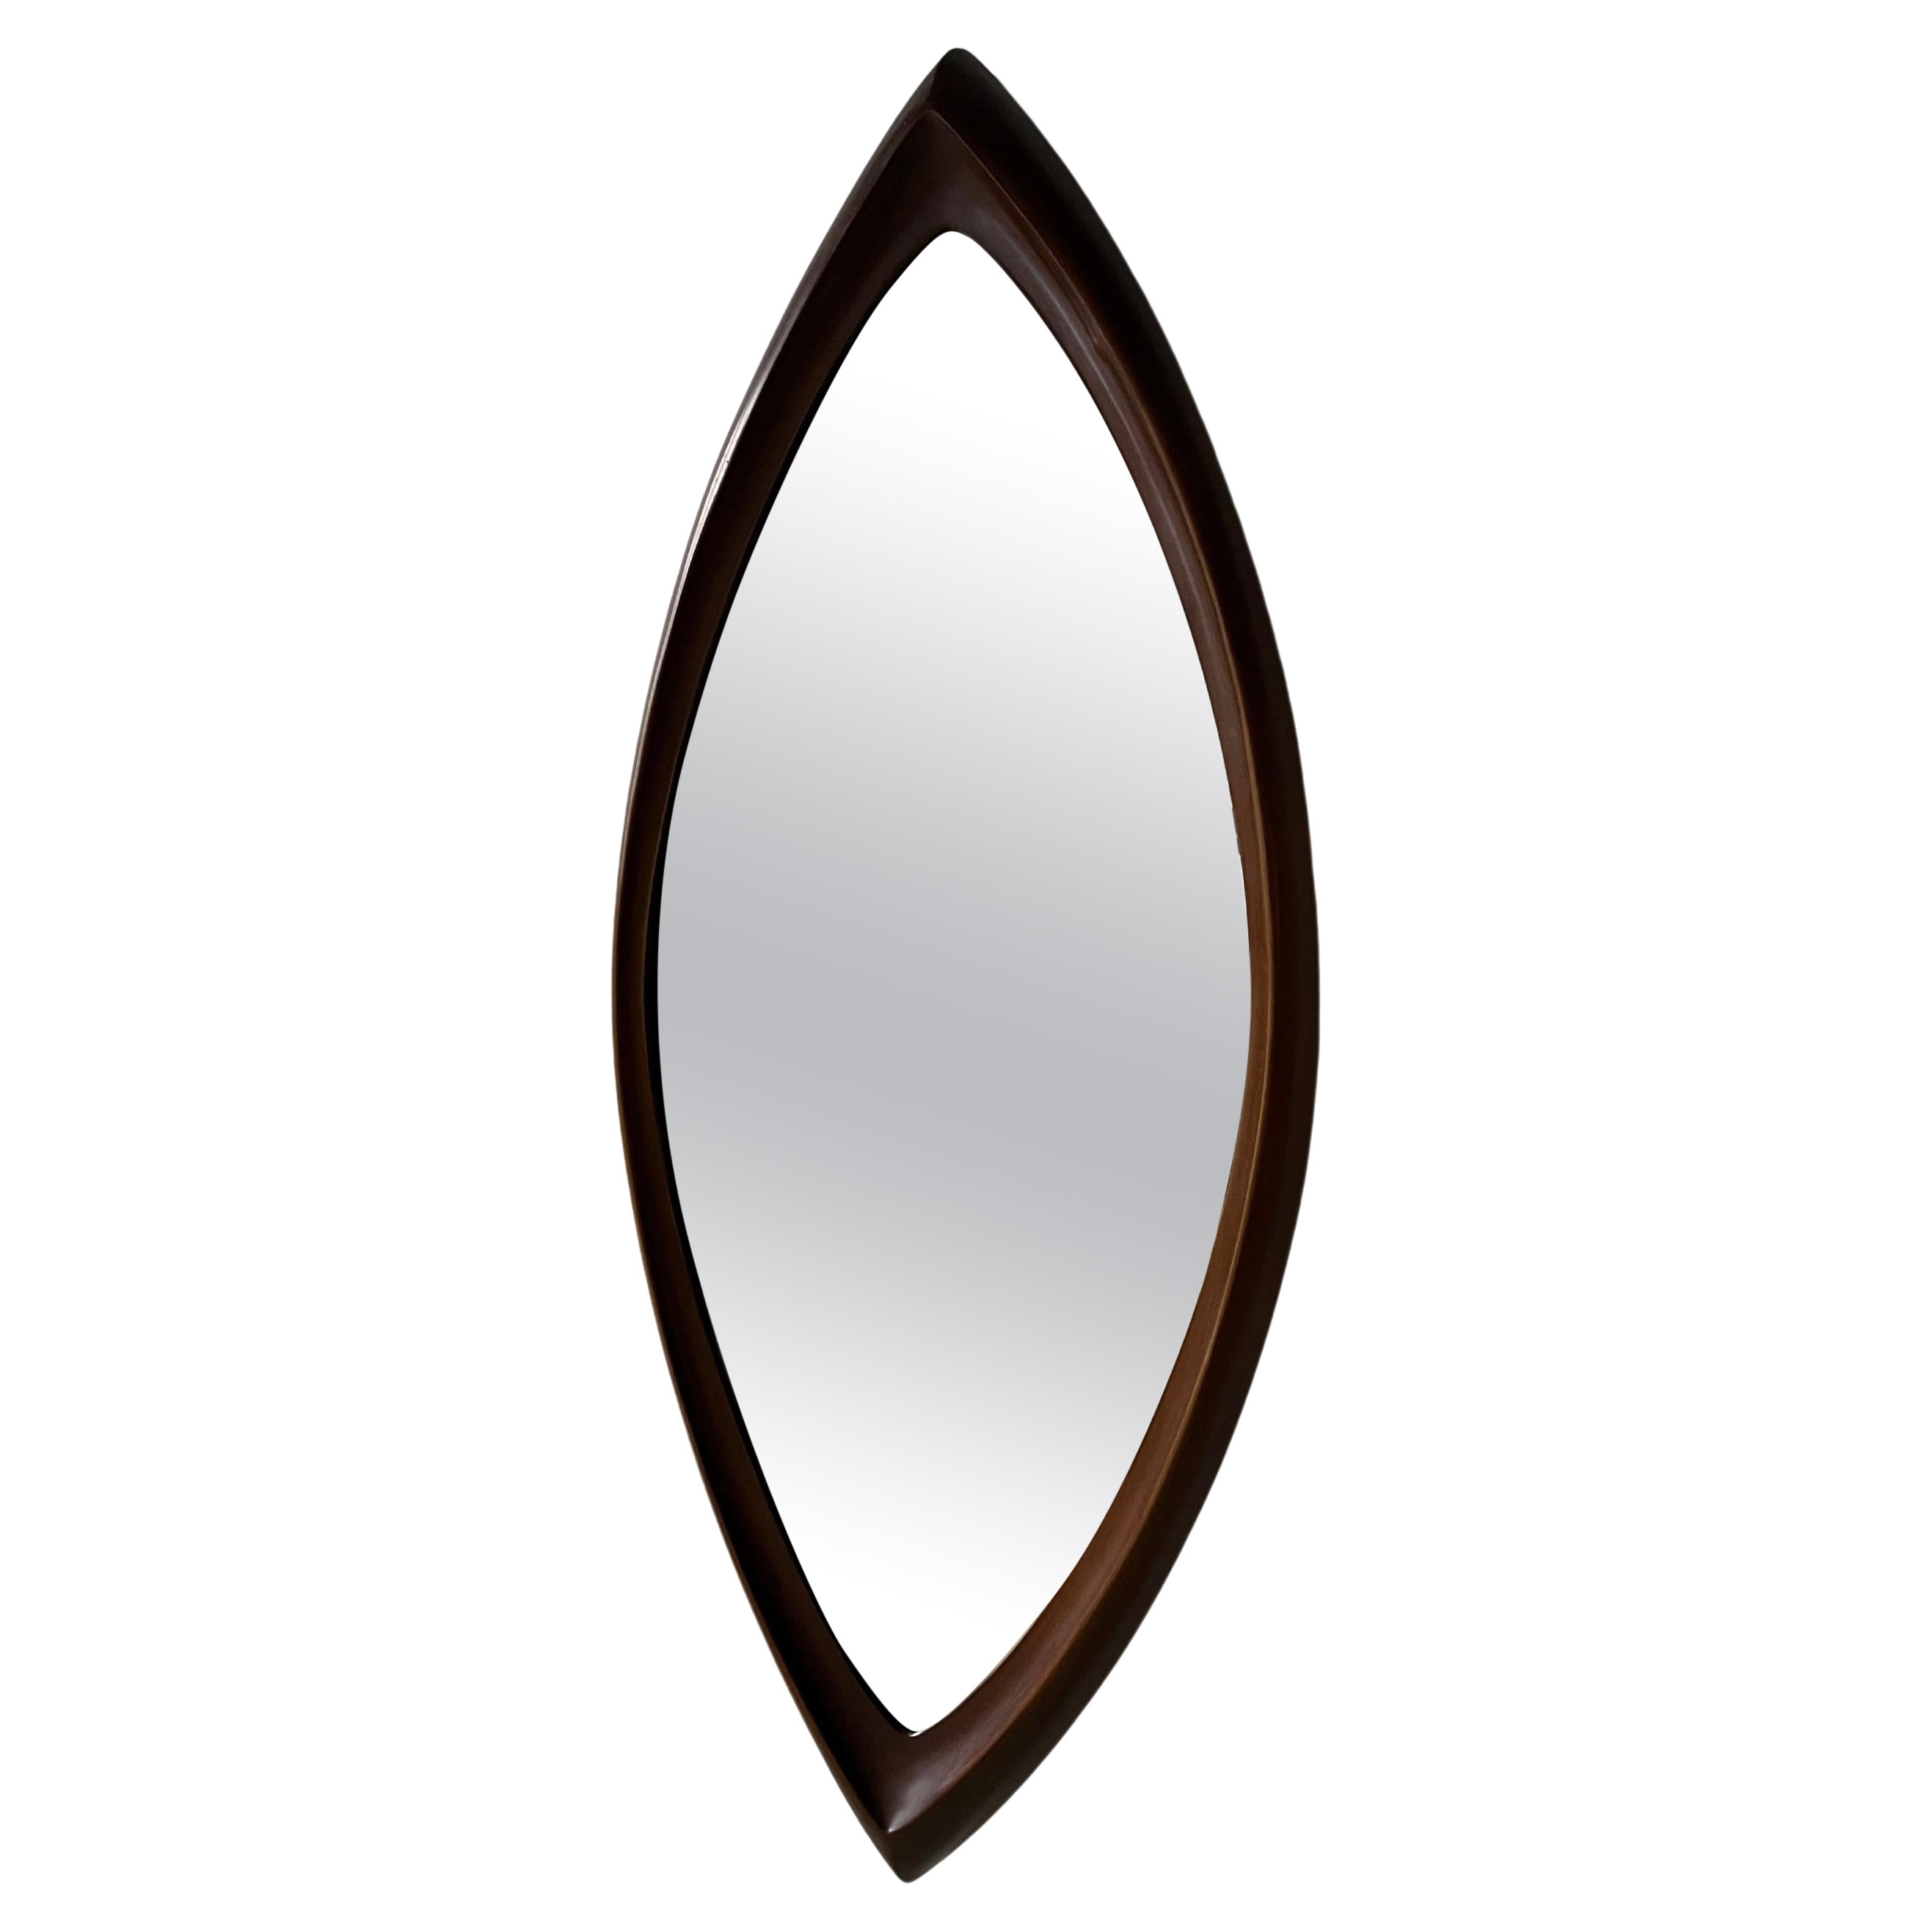 What are Syroco mirrors made of?